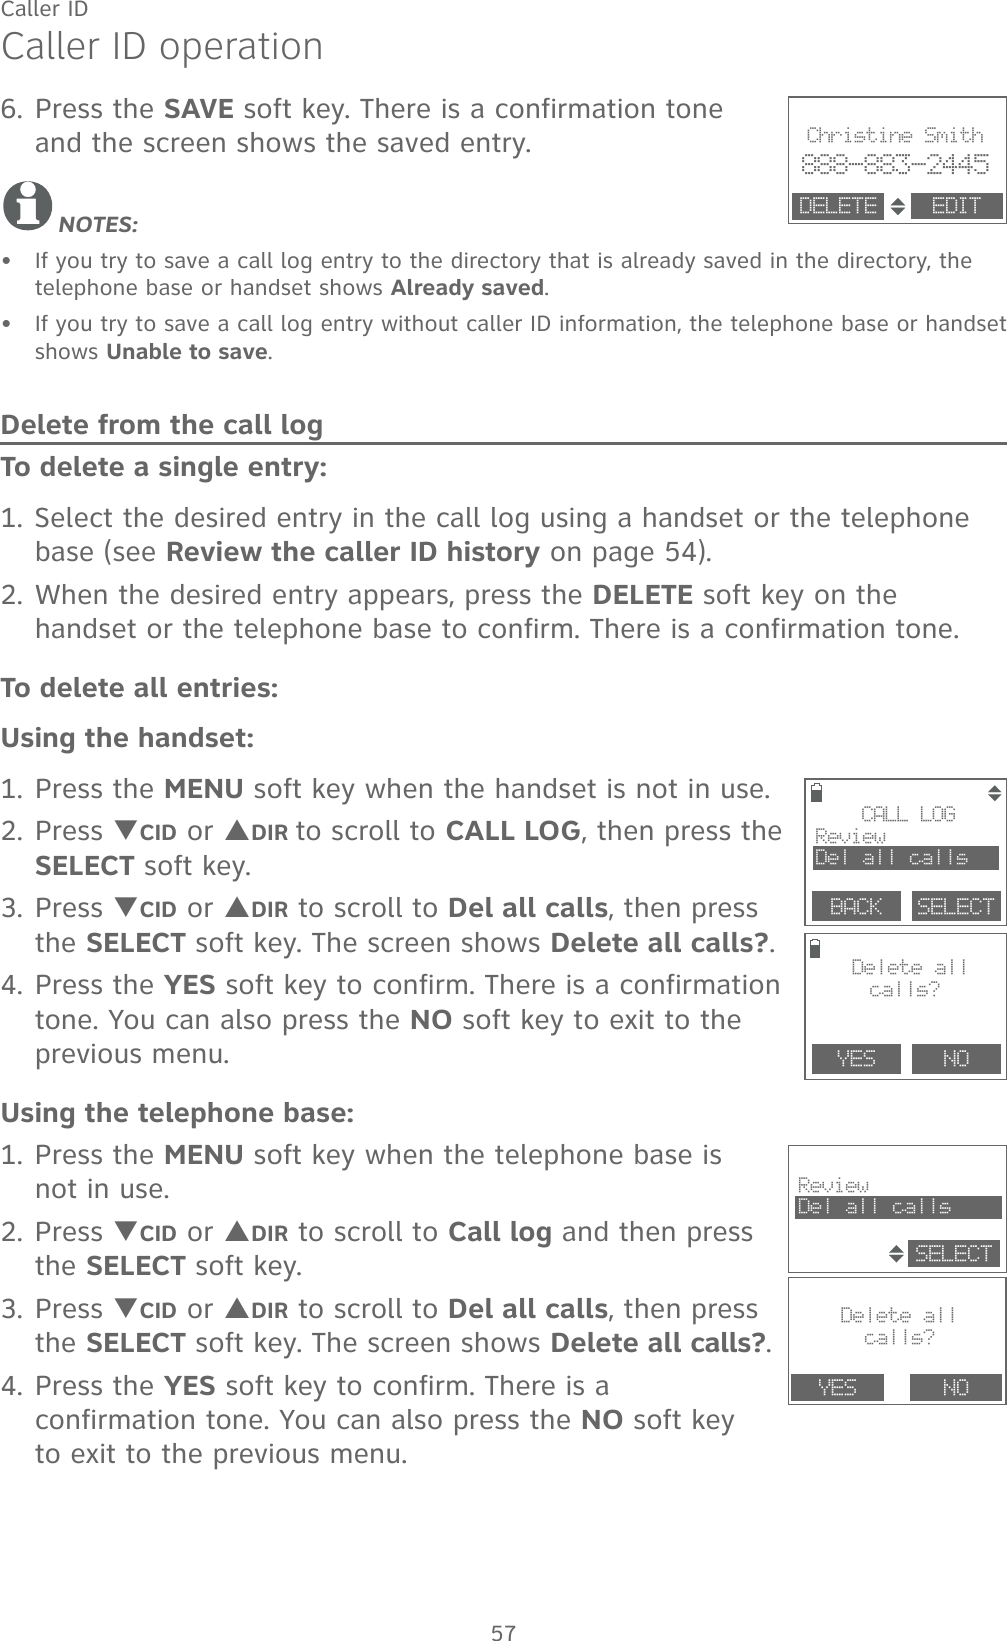 57Caller IDCaller ID operation6. Press the SAVE soft key. There is a confirmation tone  and the screen shows the saved entry.NOTES: If you try to save a call log entry to the directory that is already saved in the directory, the telephone base or handset shows Already saved.If you try to save a call log entry without caller ID information, the telephone base or handset shows Unable to save.Delete from the call logTo delete a single entry:1. Select the desired entry in the call log using a handset or the telephone base (see Review the caller ID history on page 54).2. When the desired entry appears, press the DELETE soft key on the handset or the telephone base to confirm. There is a confirmation tone.To delete all entries:Using the handset:1. Press the MENU soft key when the handset is not in use.2. Press TCID or SDIR to scroll to CALL LOG, then press the SELECT soft key.3. Press TCID or SDIR to scroll to Del all calls, then press the SELECT soft key. The screen shows Delete all calls?.4. Press the YES soft key to confirm. There is a confirmation tone. You can also press the NO soft key to exit to the previous menu.Using the telephone base:1. Press the MENU soft key when the telephone base is not in use.2. Press TCID or SDIR to scroll to Call log and then press the SELECT soft key.3. Press TCID or SDIR to scroll to Del all calls, then press the SELECT soft key. The screen shows Delete all calls?.4. Press the YES soft key to confirm. There is a confirmation tone. You can also press the NO soft key  to exit to the previous menu. ••                       Christine Smith888-883-2445EDITDELETE                                              Delete allcalls?YES NOReviewDel all callsSELECT        YES    NO        CALL LOGReviewDel all callsBACK    SELECT Delete all calls?